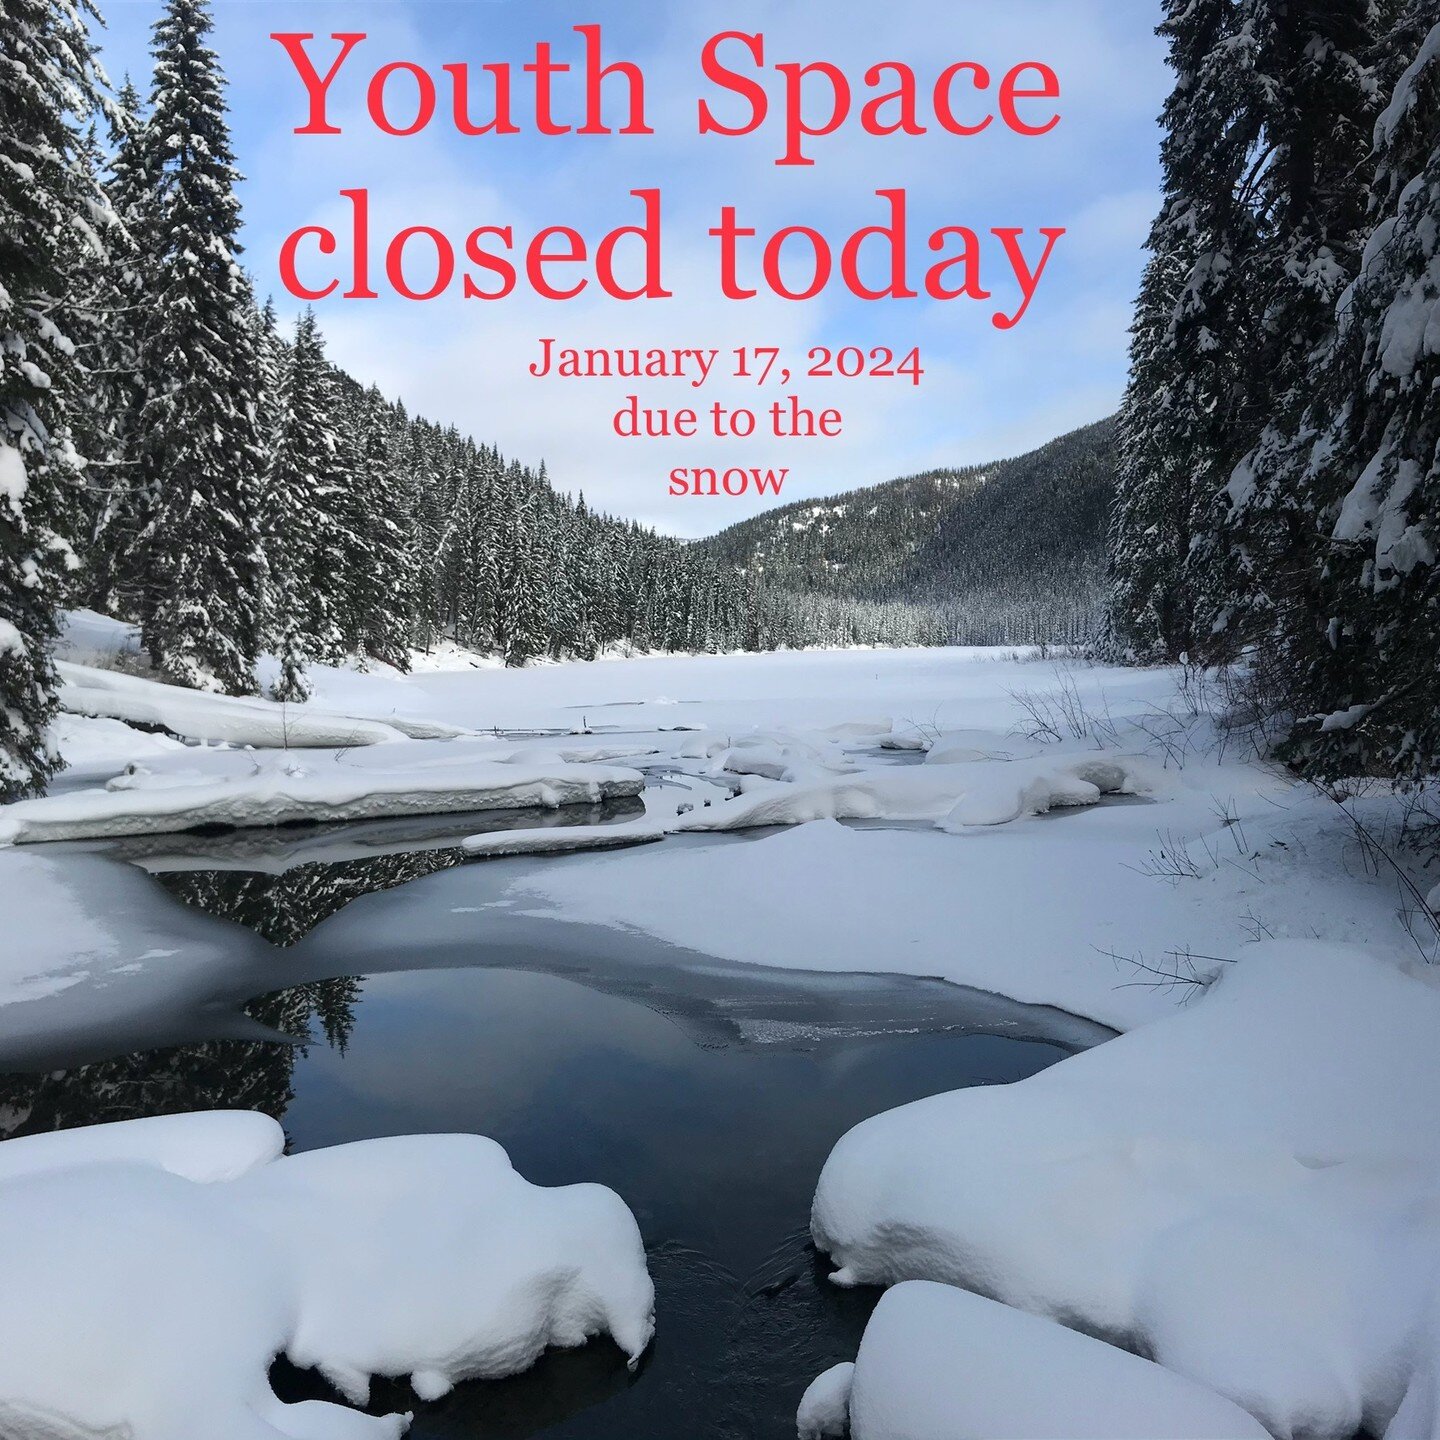 Youth Space Closed today for all programming. Stay safe out there and enjoy the snow!